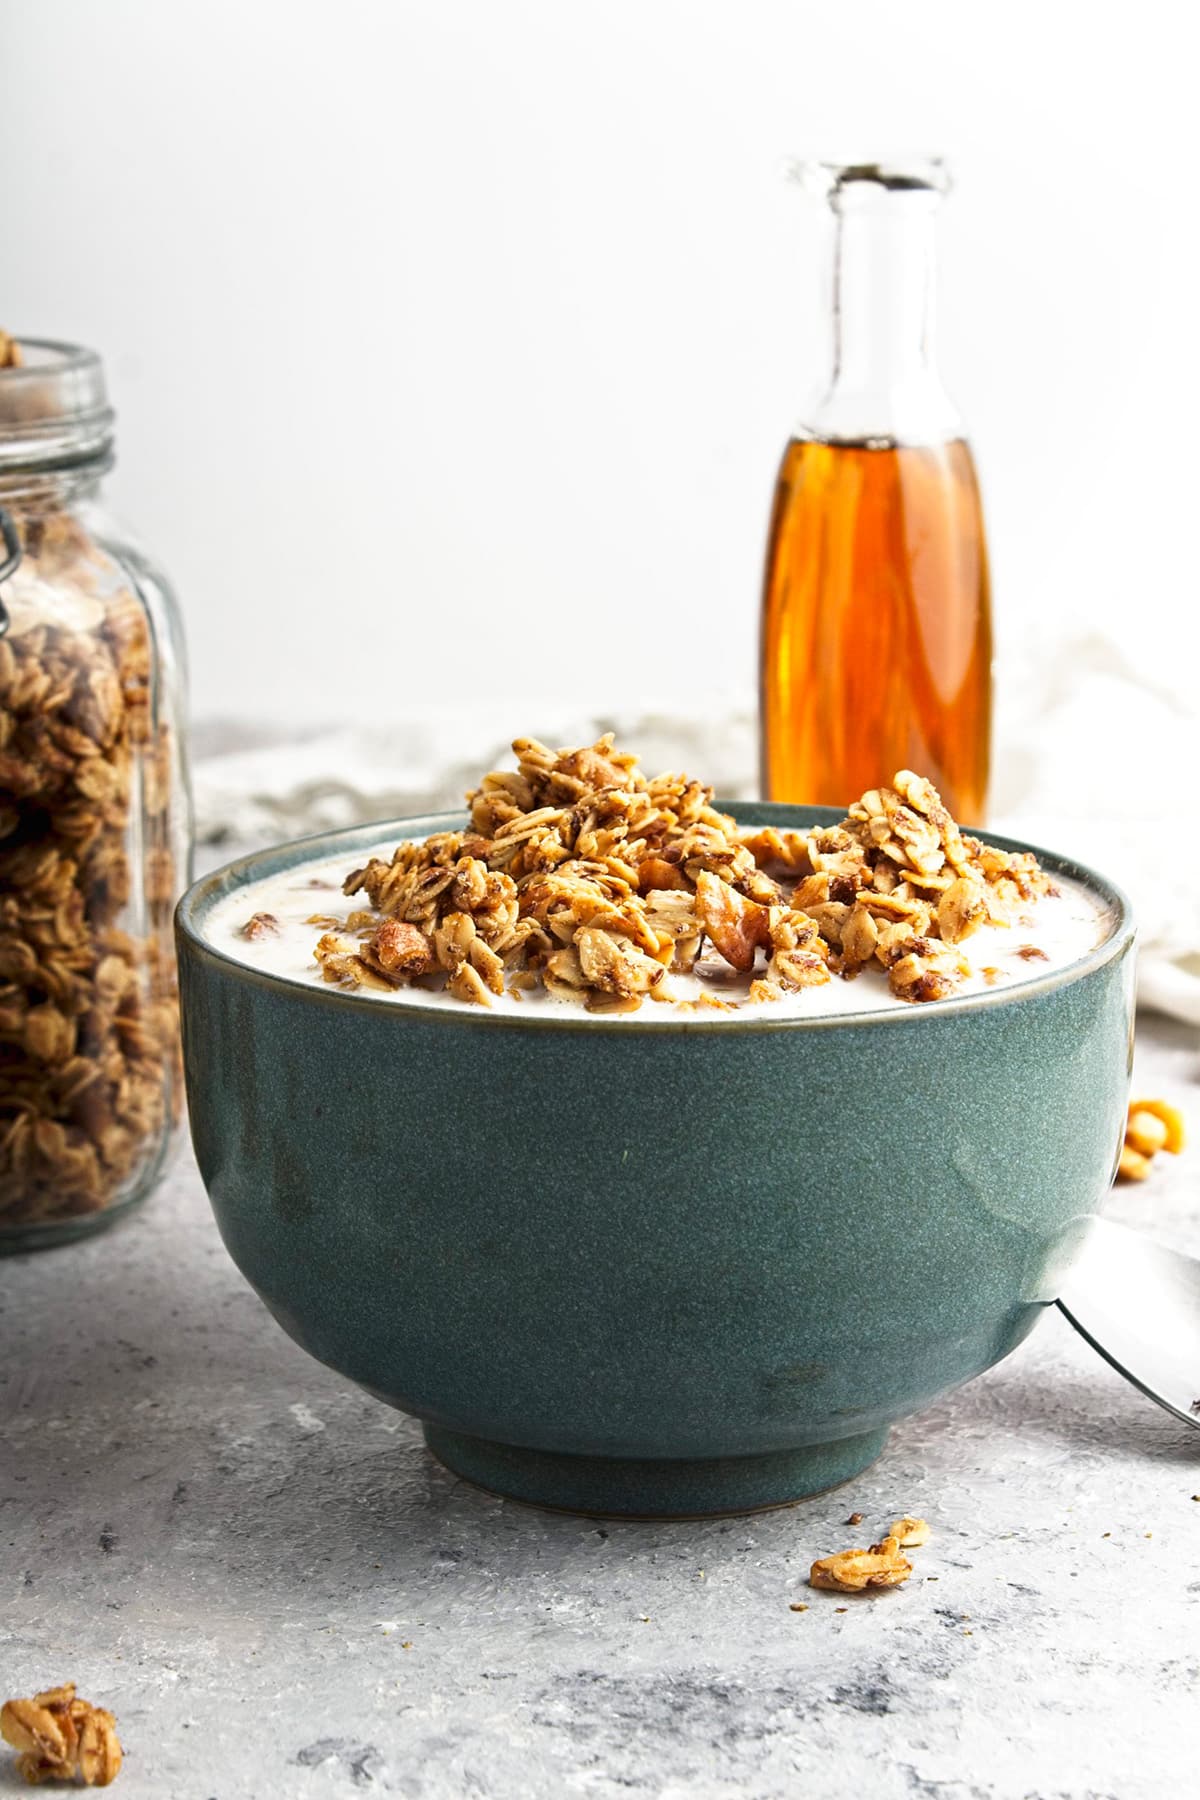 Granola in bowl with maple syrup and jar of granola in background.